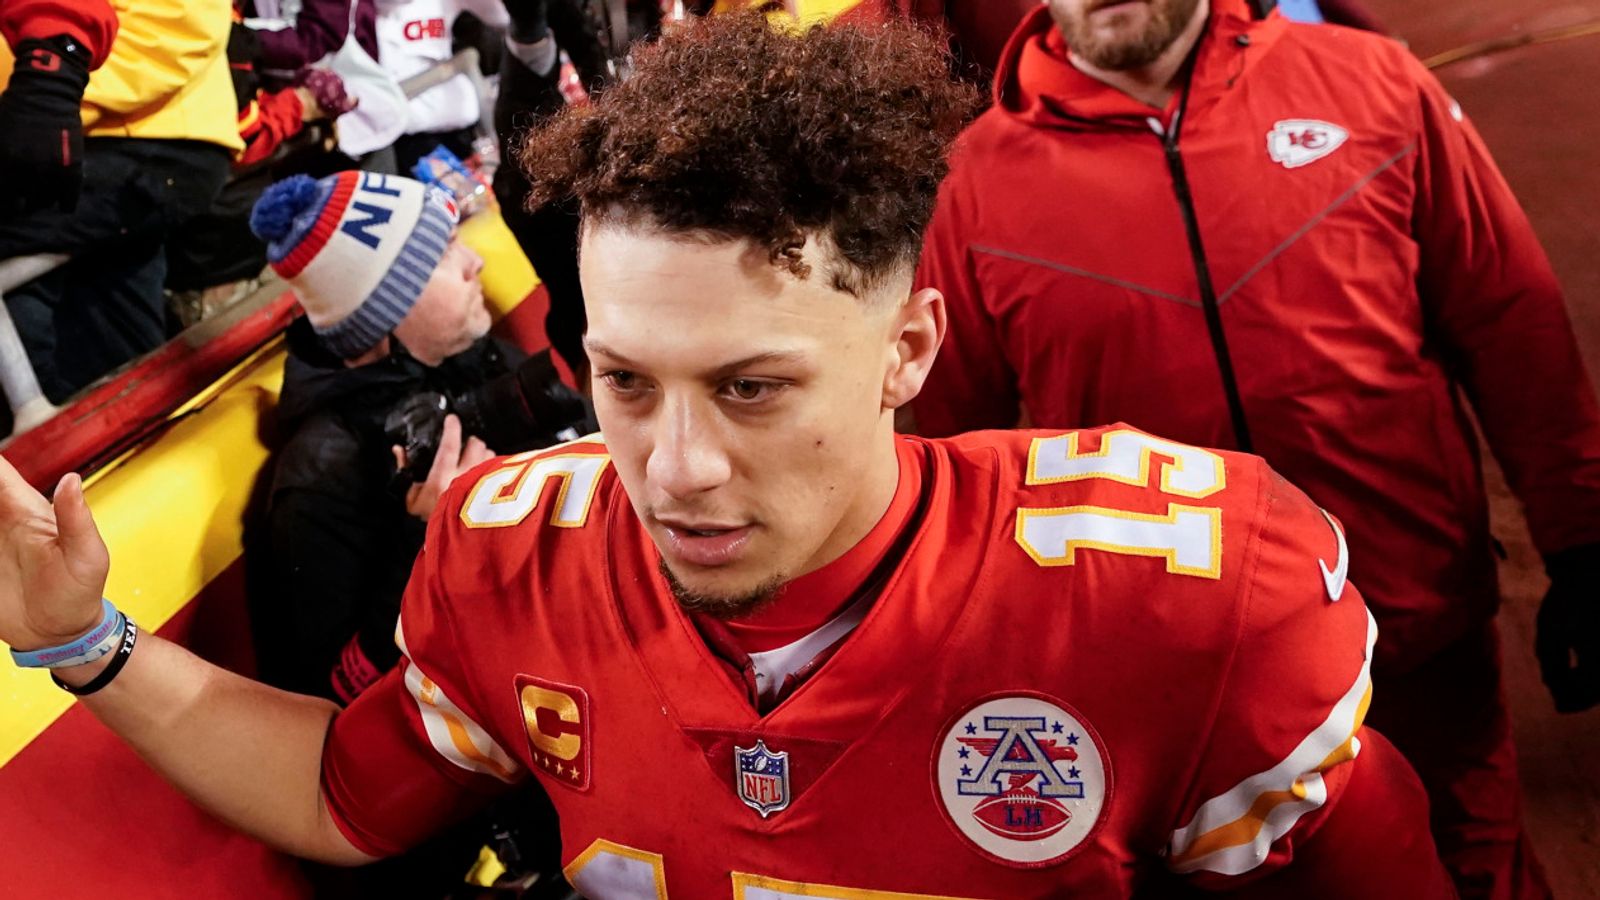 Jacksonville Jaguars 20-27 Kansas City Chiefs: Patrick Mahomes overcomes ankle injury as Chiefs reach fifth straight AFC Championship |  NFL news